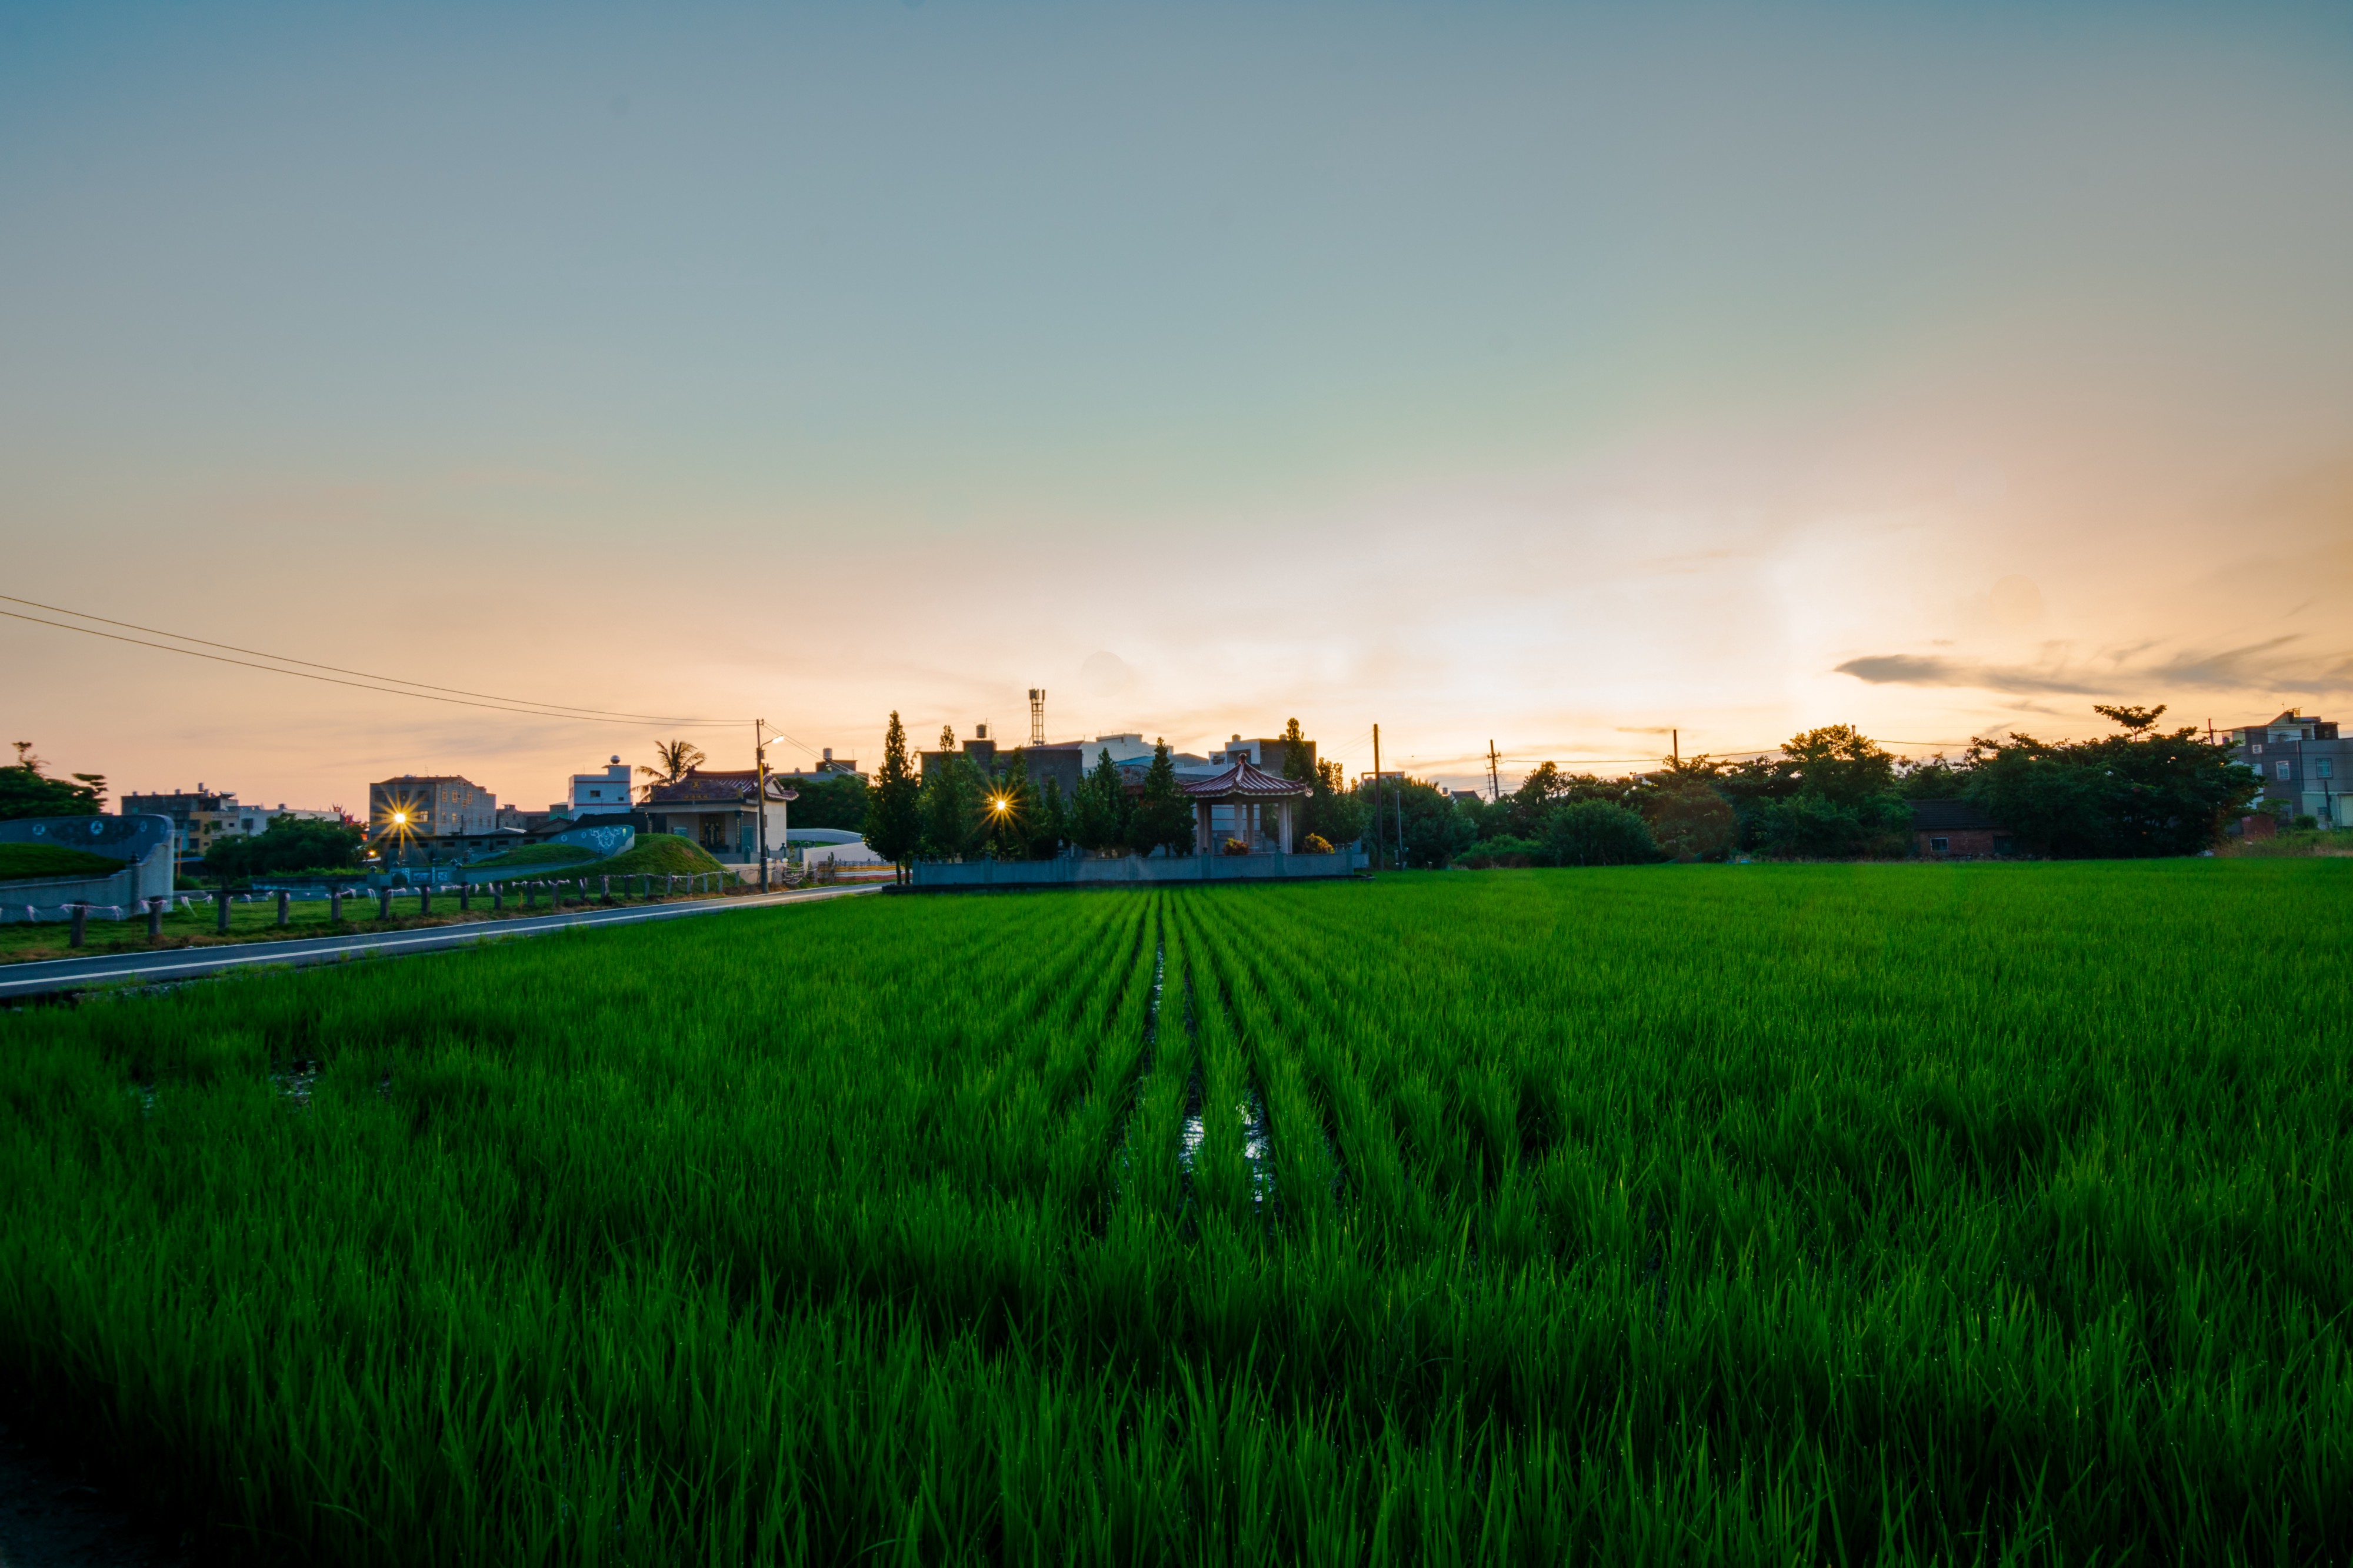 Rice fields right outside 宜梧 (YiWu) Junior High School during sunset (taken on my Nikon D3400)